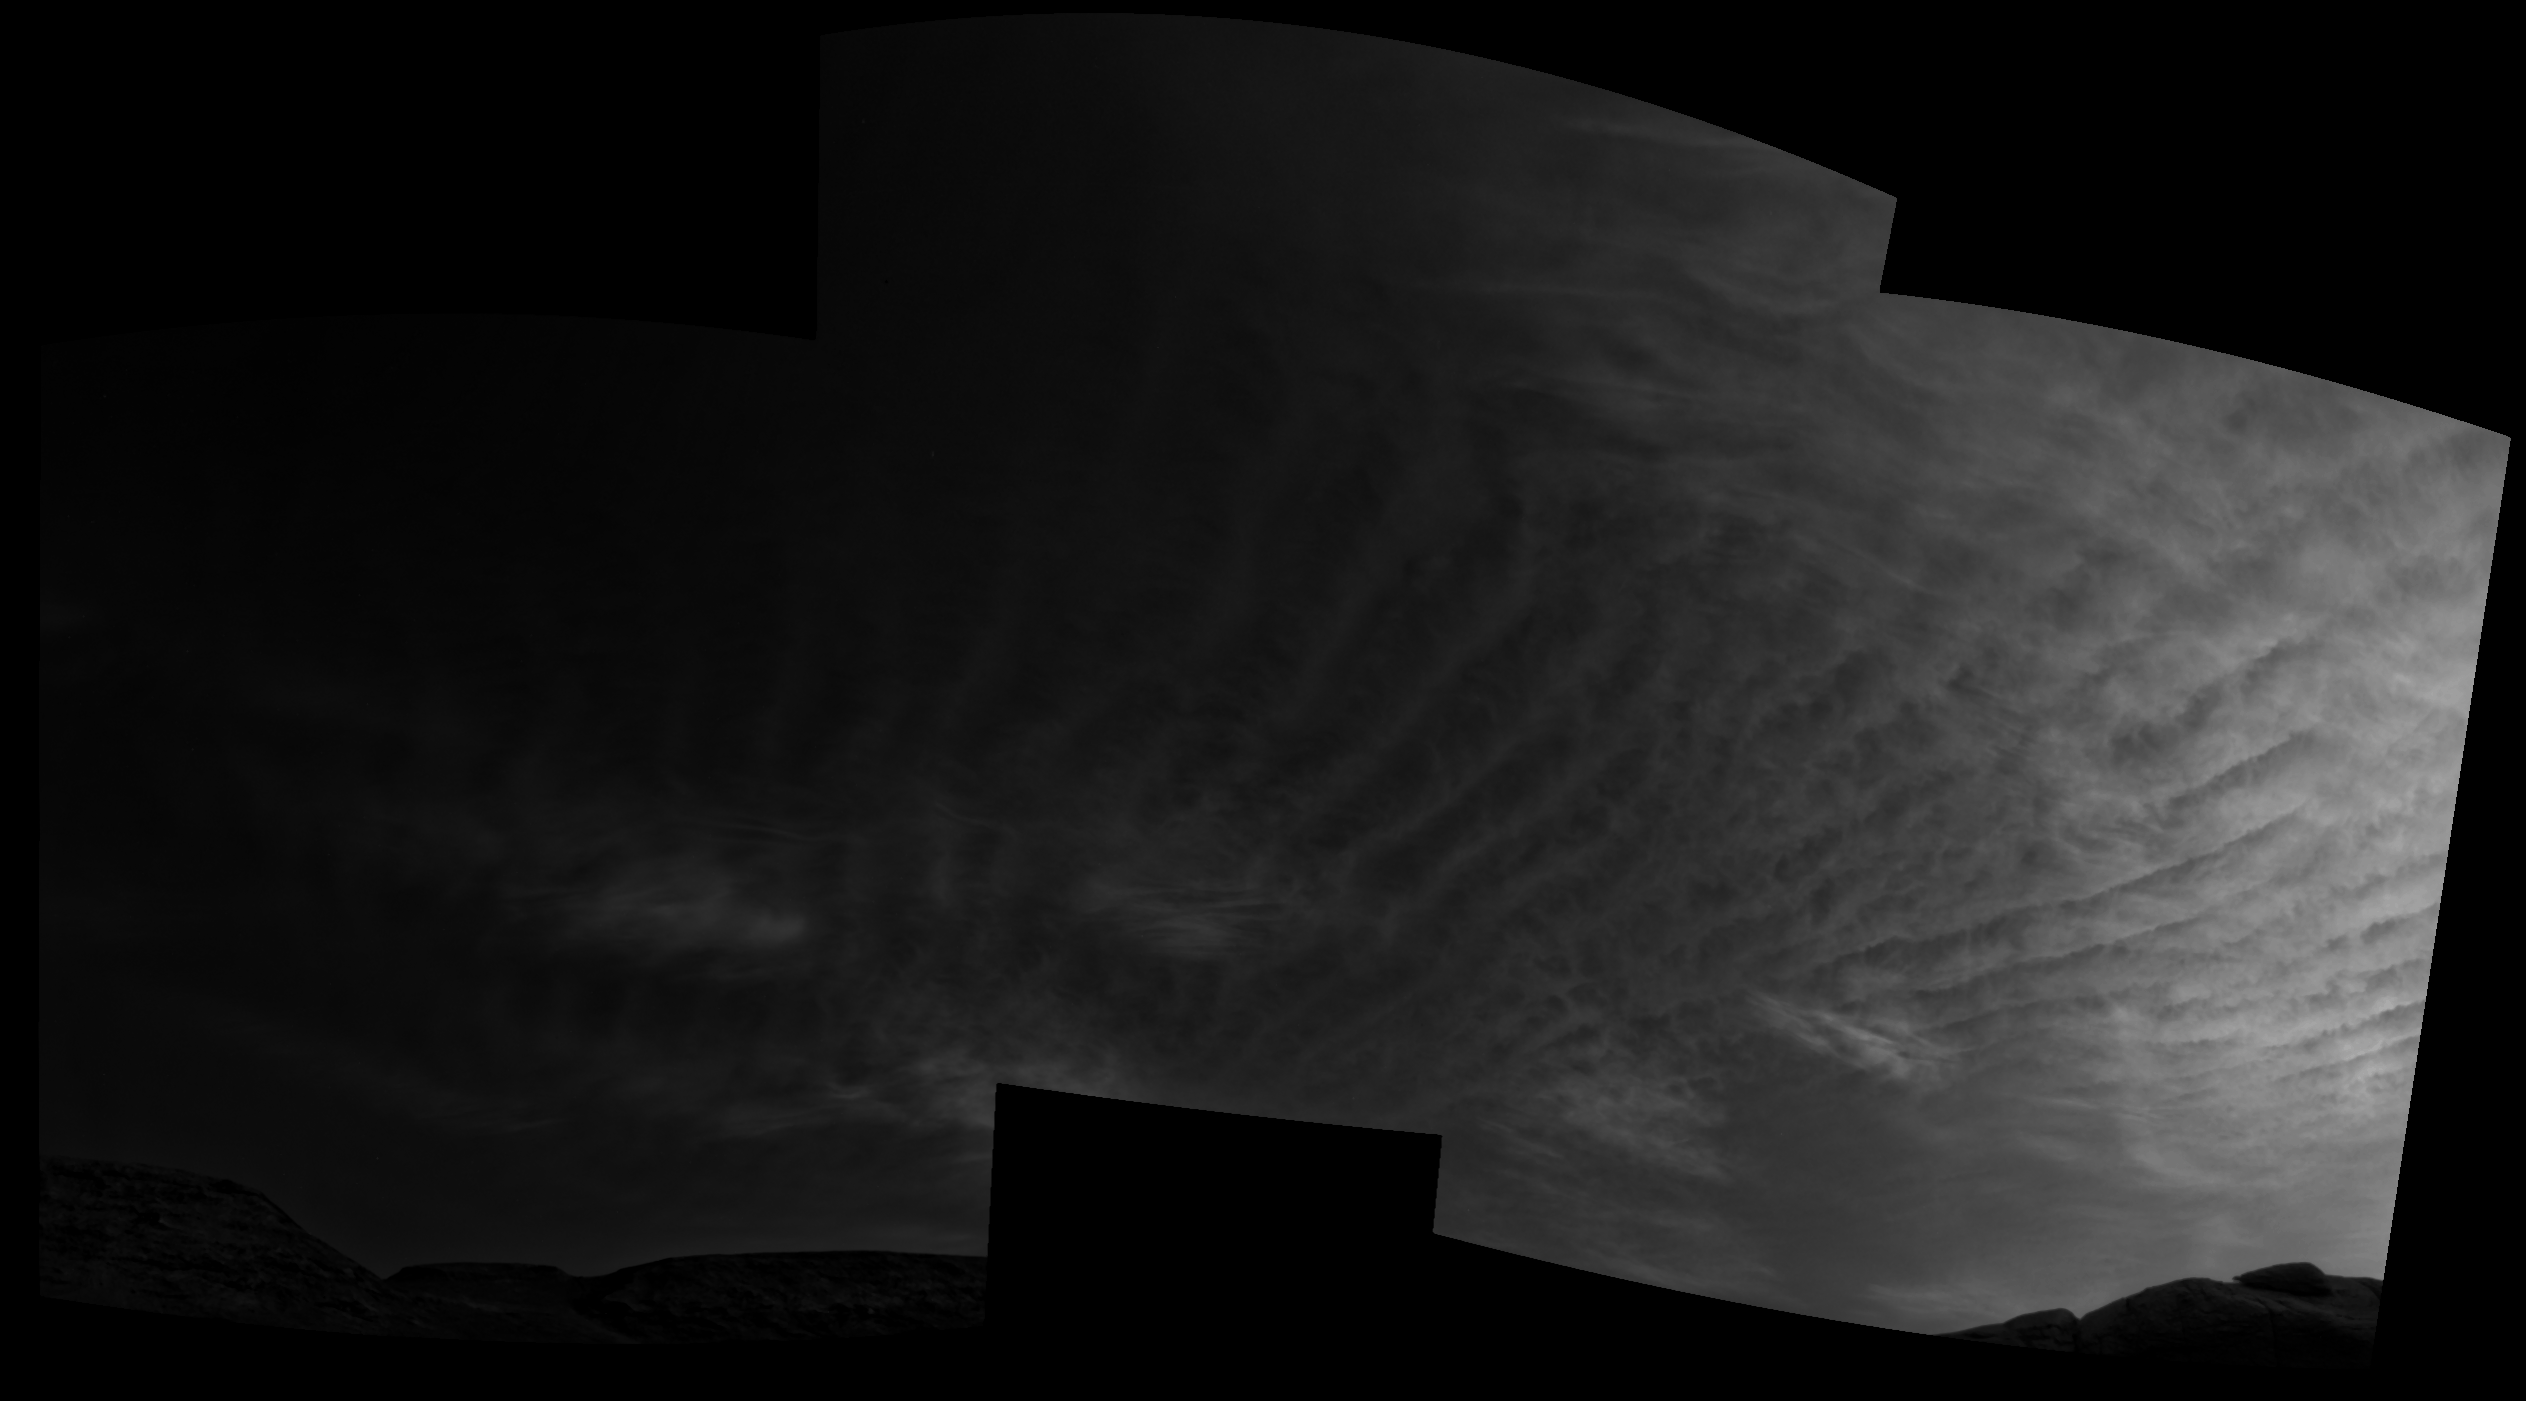 Using the navigation cameras on its mast, NASA's Curiosity Mars rover took these images of clouds just after sunset on March 31, 2021, the 3,075th sol, or Martian day, of the mission. (Gif: NASA/JPL-Caltech)